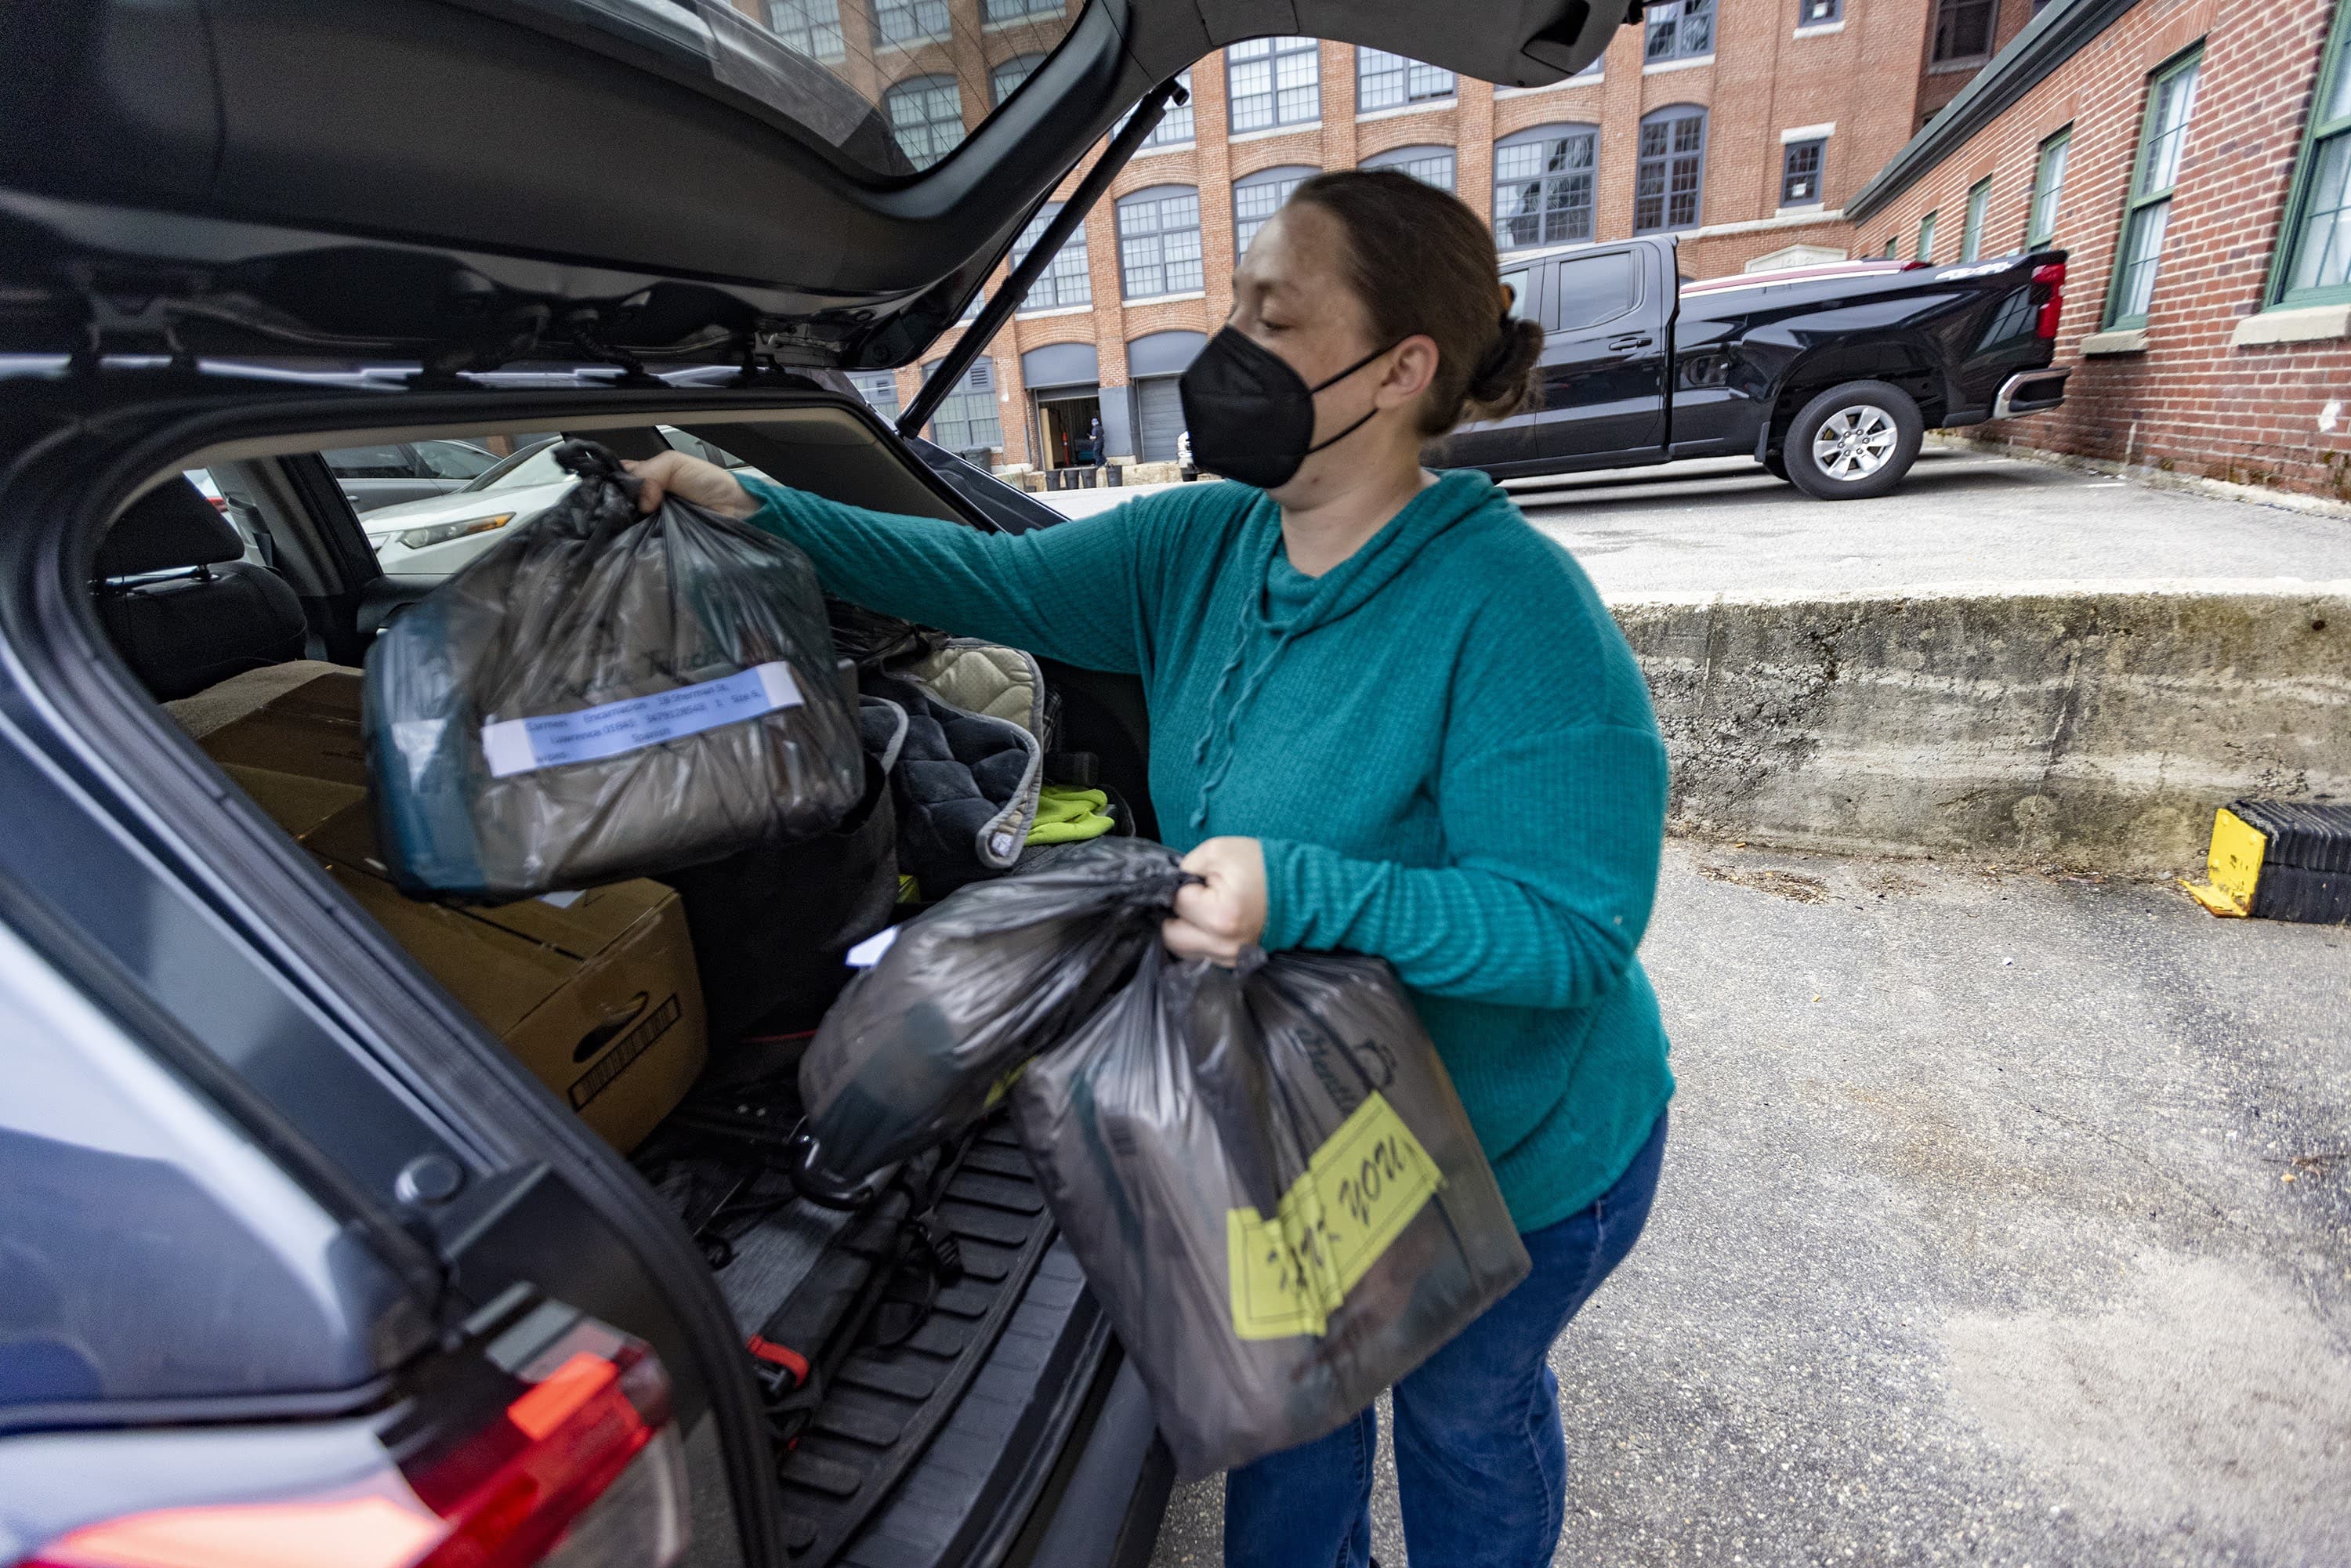 Maggie Clougherty loads up her SUV with diaper orders to make deliveries around the Lawrence area for Neighbors In Need. (Jesse Costa/WBUR)